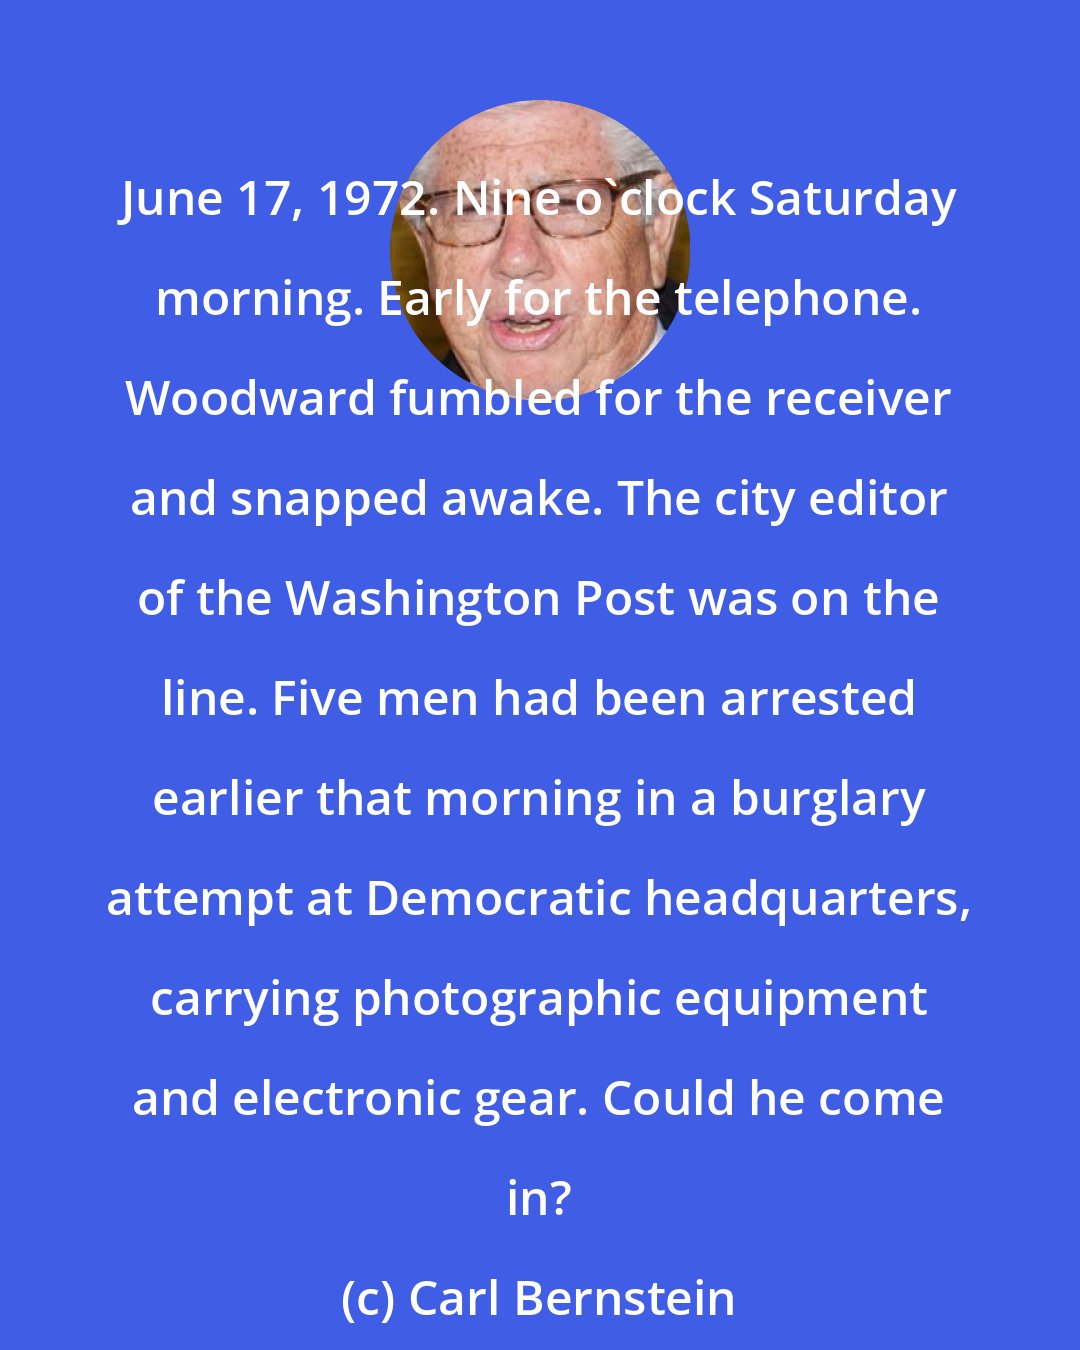 Carl Bernstein: June 17, 1972. Nine o'clock Saturday morning. Early for the telephone. Woodward fumbled for the receiver and snapped awake. The city editor of the Washington Post was on the line. Five men had been arrested earlier that morning in a burglary attempt at Democratic headquarters, carrying photographic equipment and electronic gear. Could he come in?